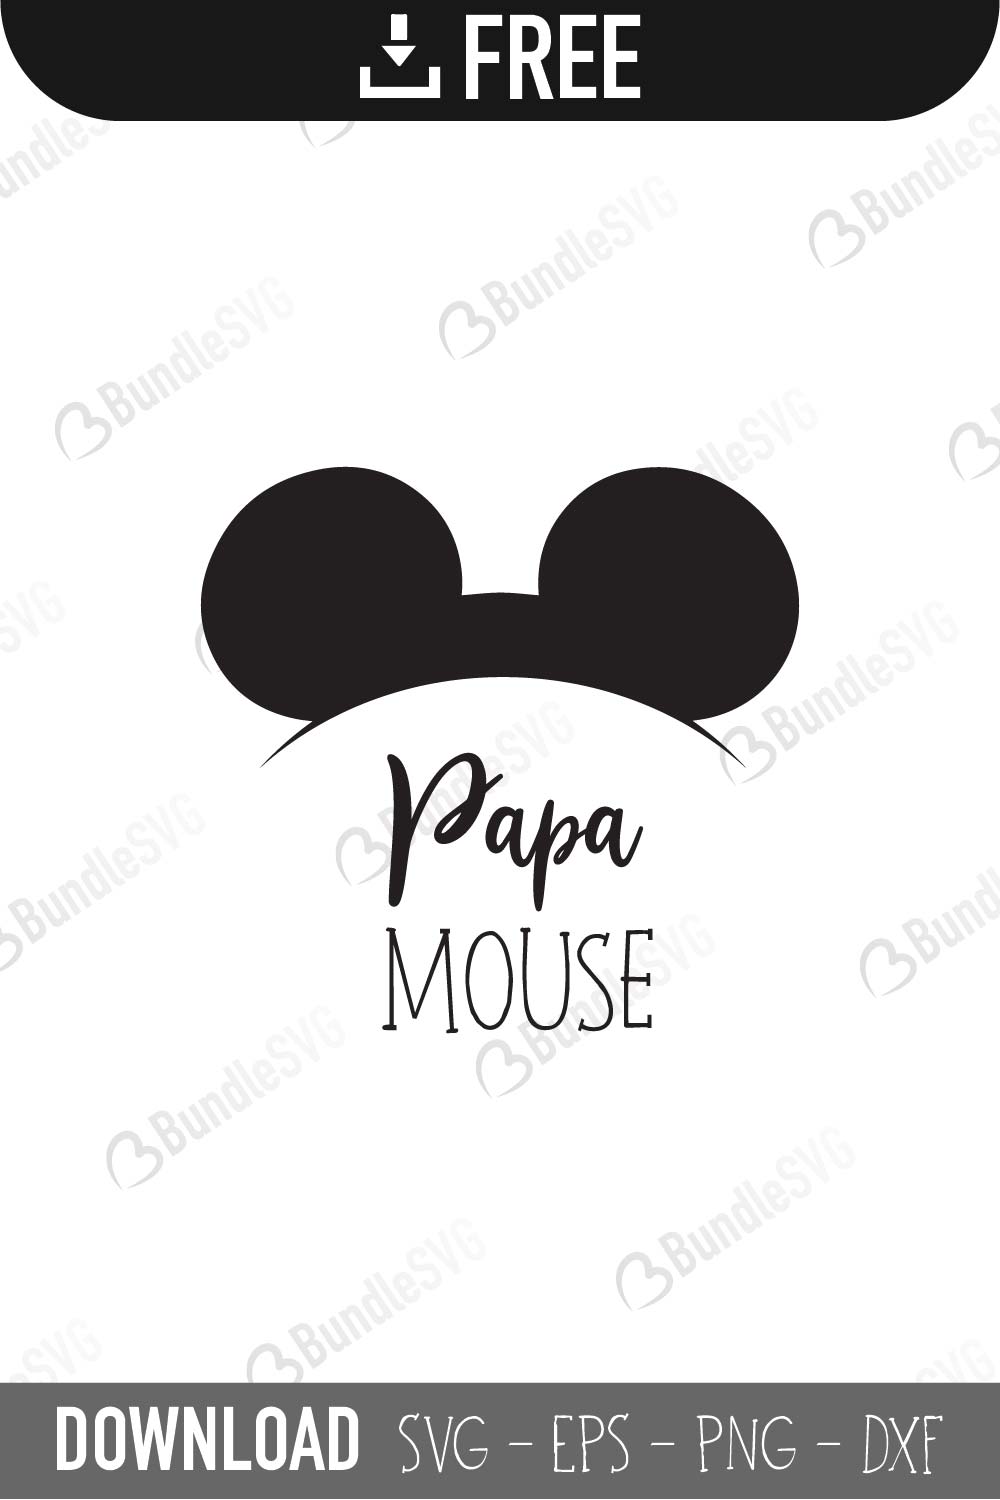 baby mouse, baby mouse cricut, baby mouse design, baby mouse download, baby mouse free, baby mouse free svg, baby mouse silhouette, baby mouse svg, baby mouse svg cut files free, cut files, dxf, silhouette, svg, vector